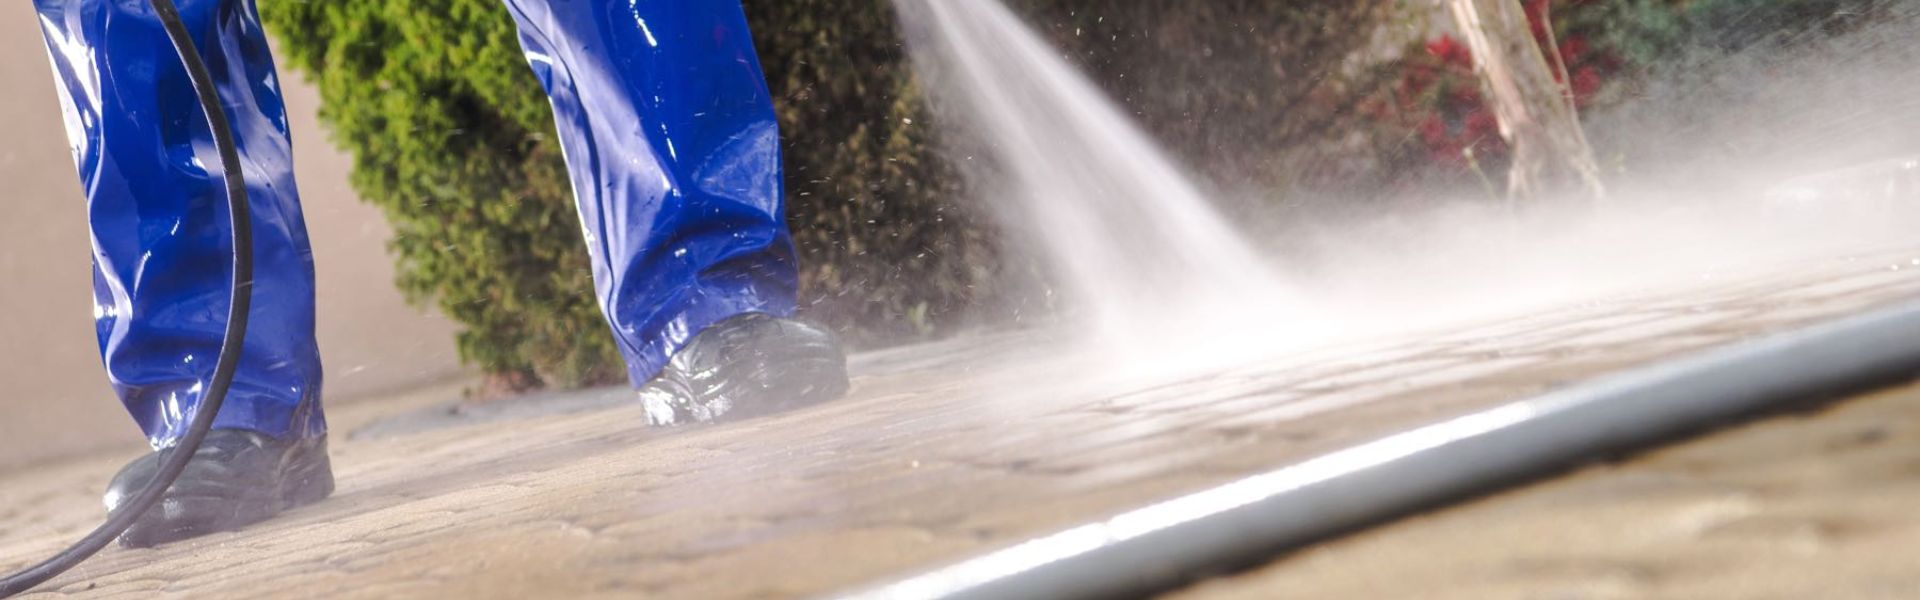 Power Wash Driveway Services in Toronto: Revitalize Your Home’s Curb Appeal